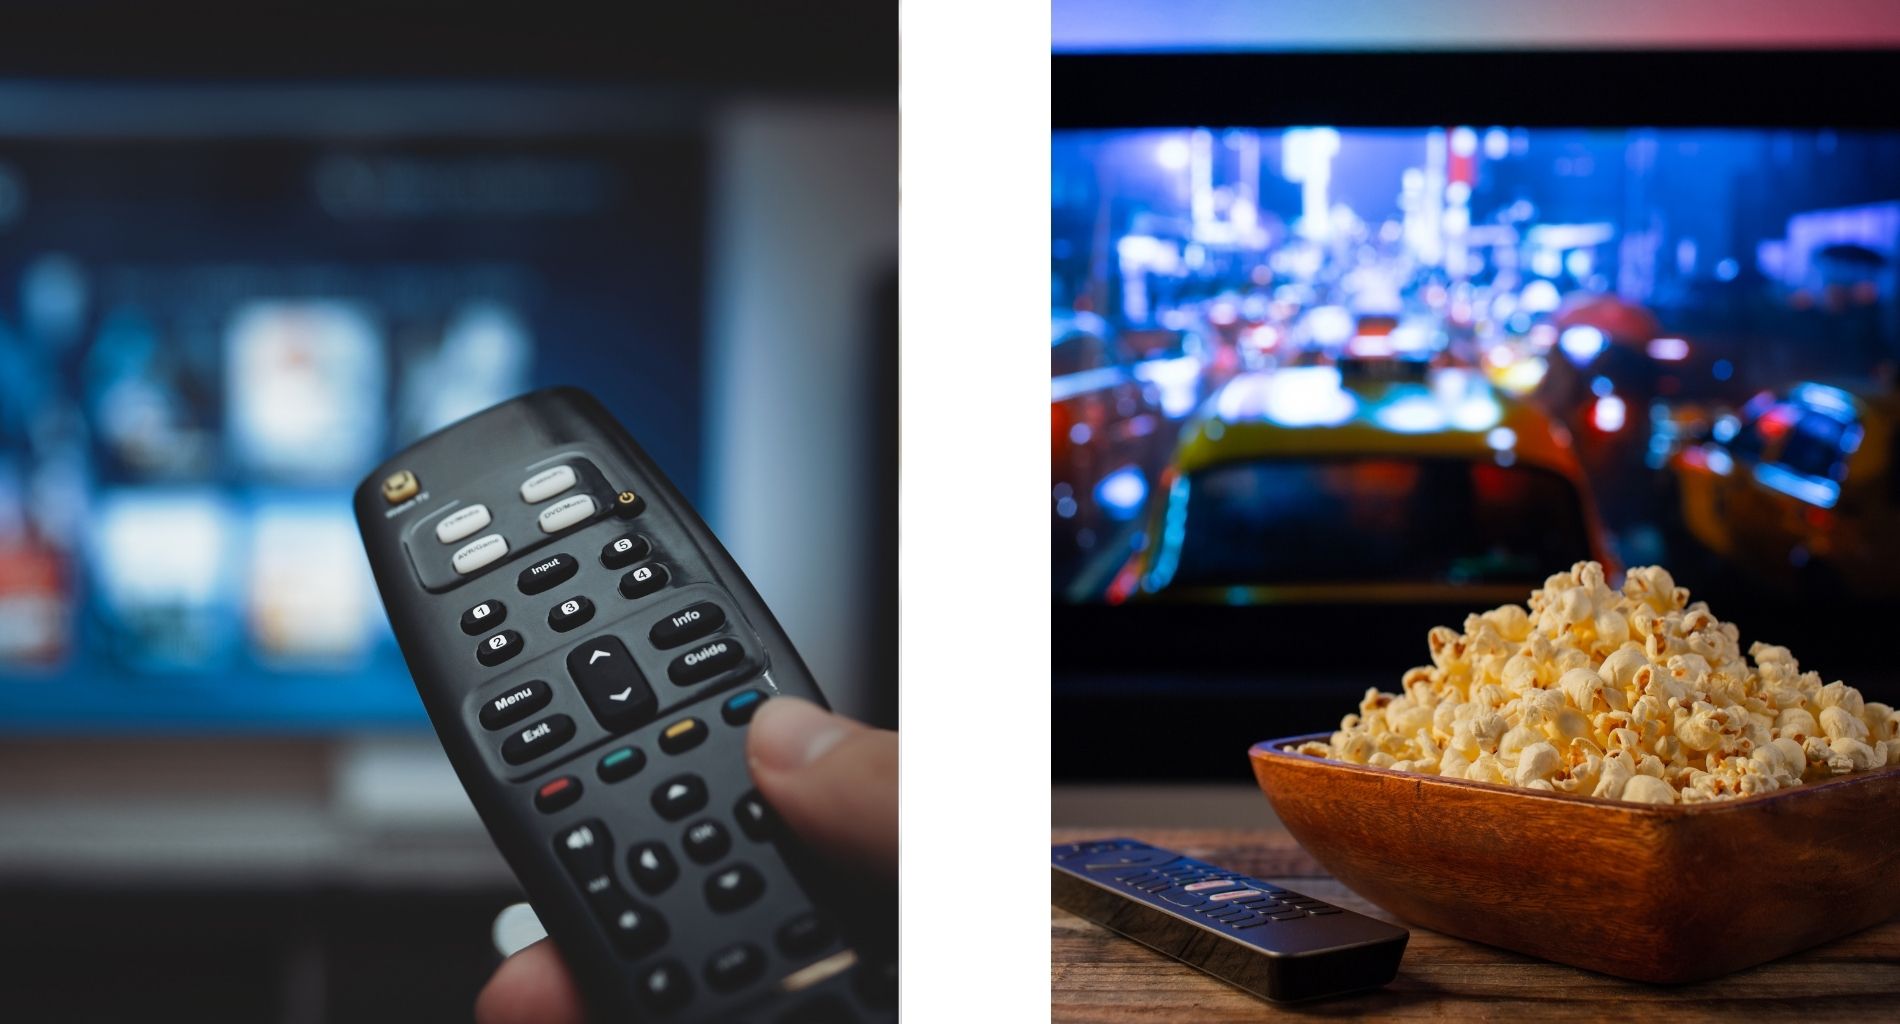 Focus on guest experience when choosing hotel tv systems